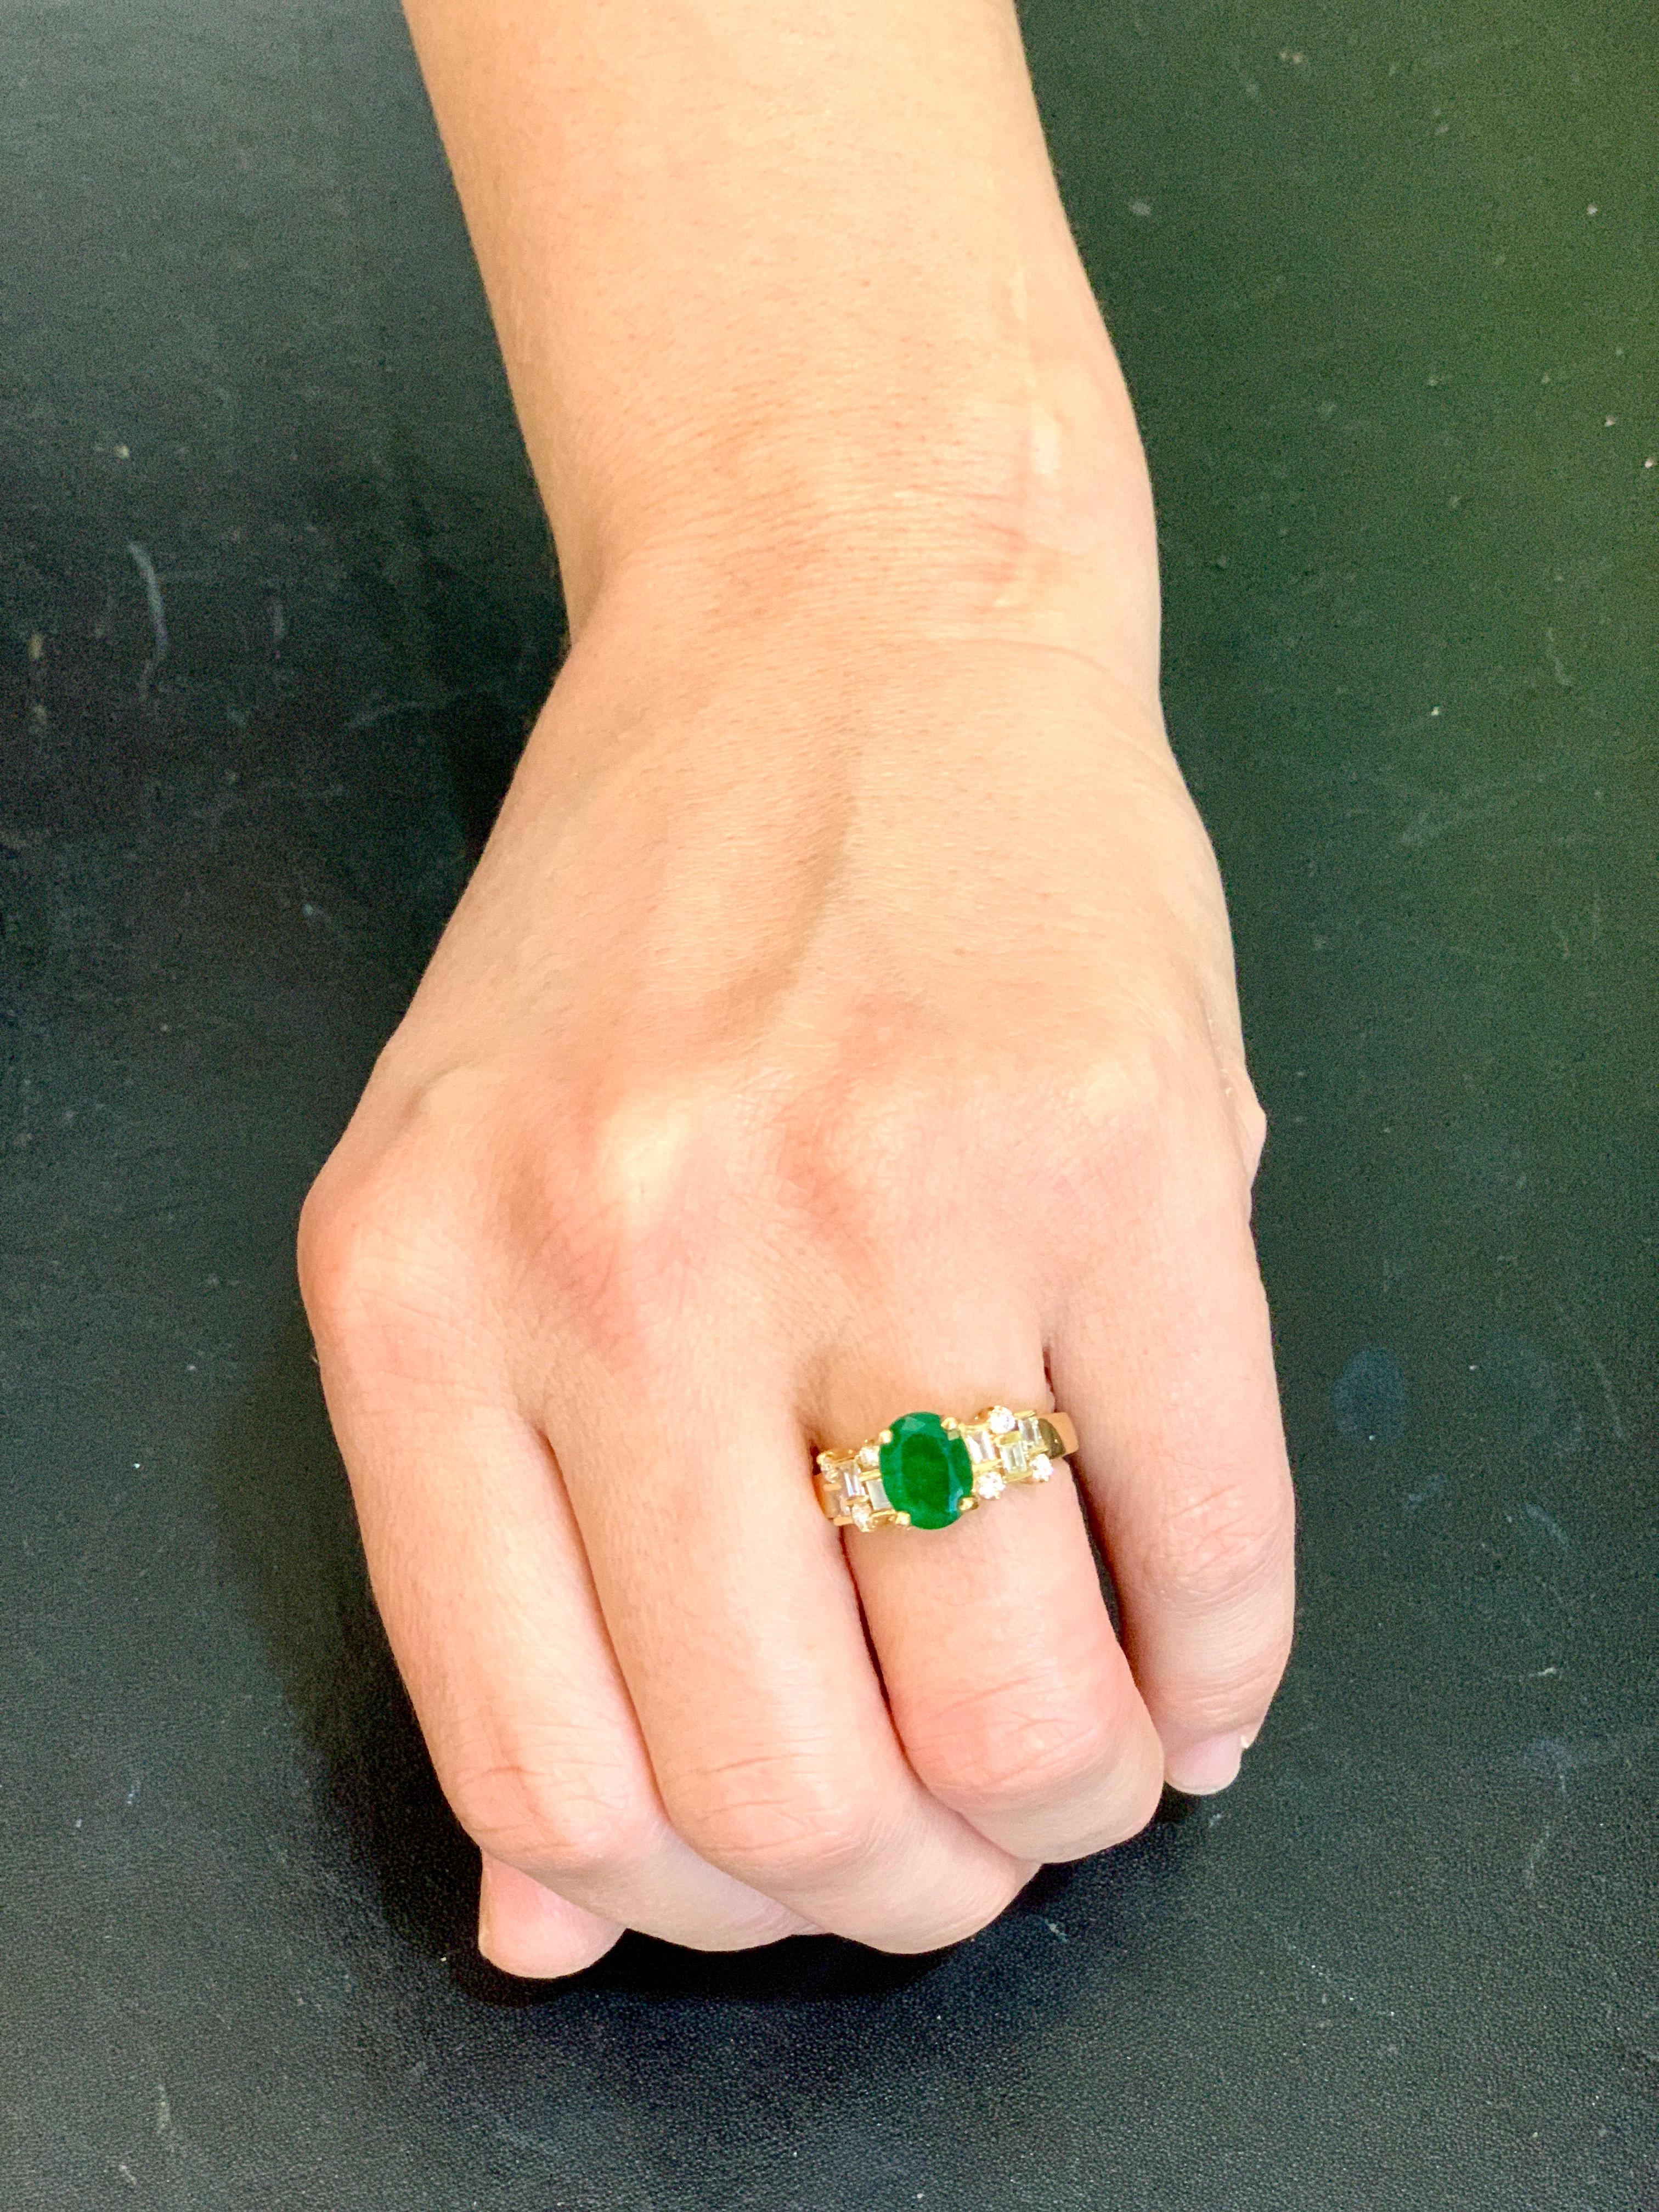 2 Carat Oval Cut Emerald and 0.5 Carat Diamond Ring 18 Karat Yellow Gold In Excellent Condition For Sale In New York, NY